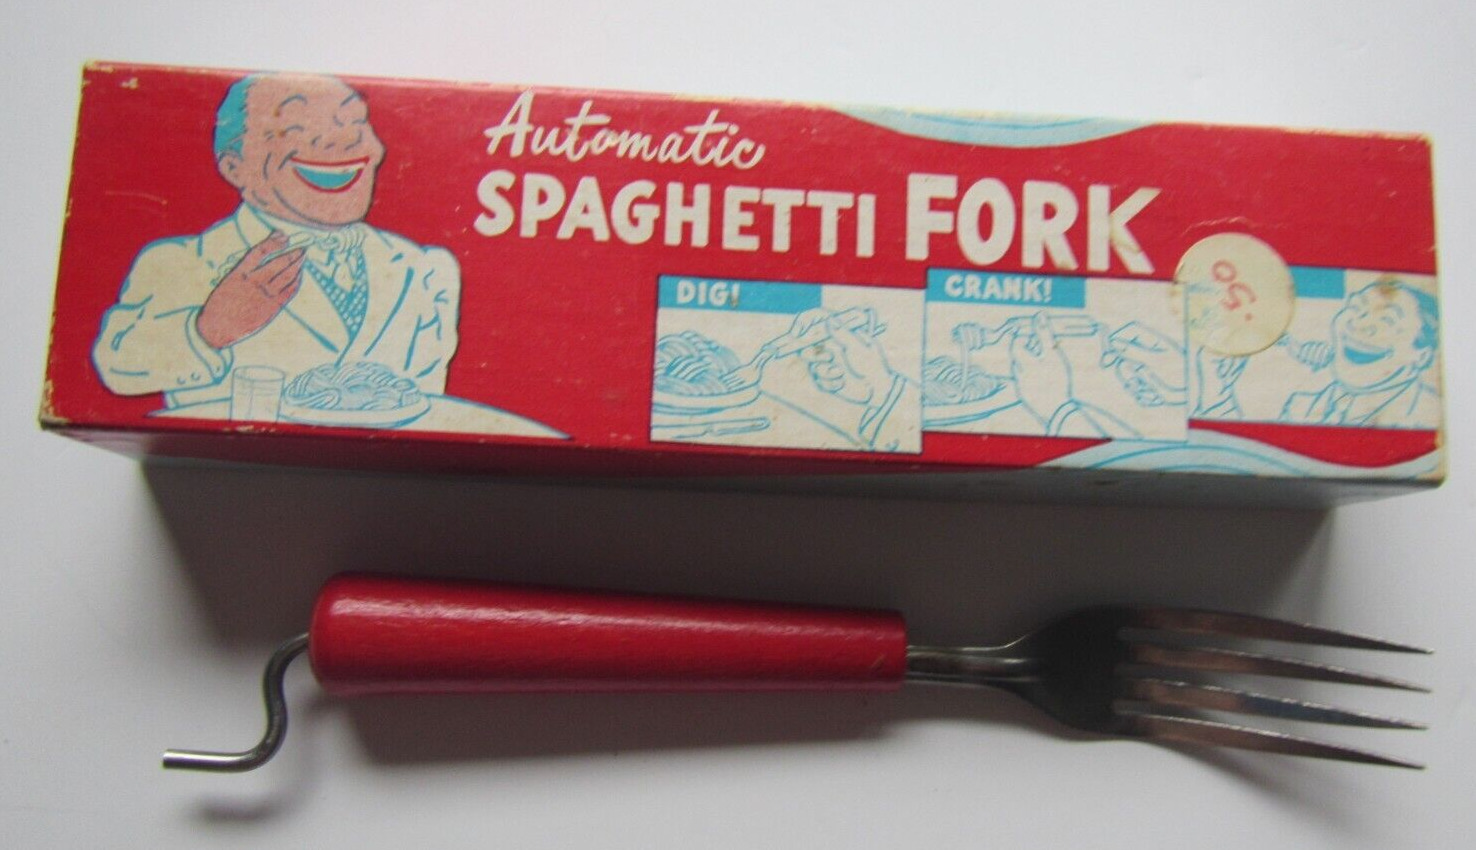 Vintage Automatic Spaghetti Fork #645 1952 H. Fishlove & co. Chicago USA in box